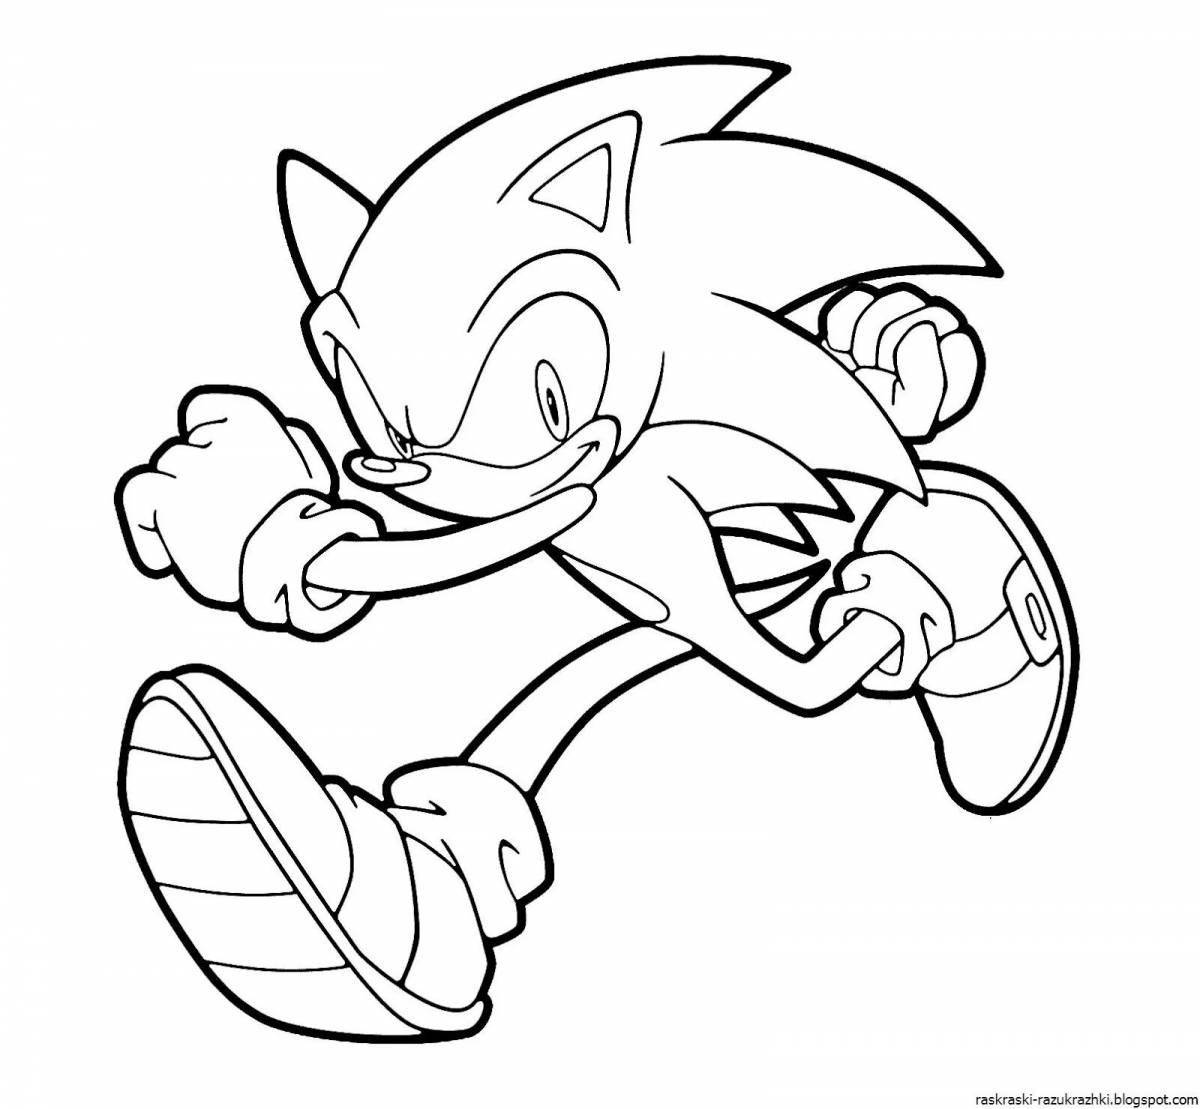 Tempting sonic light coloring